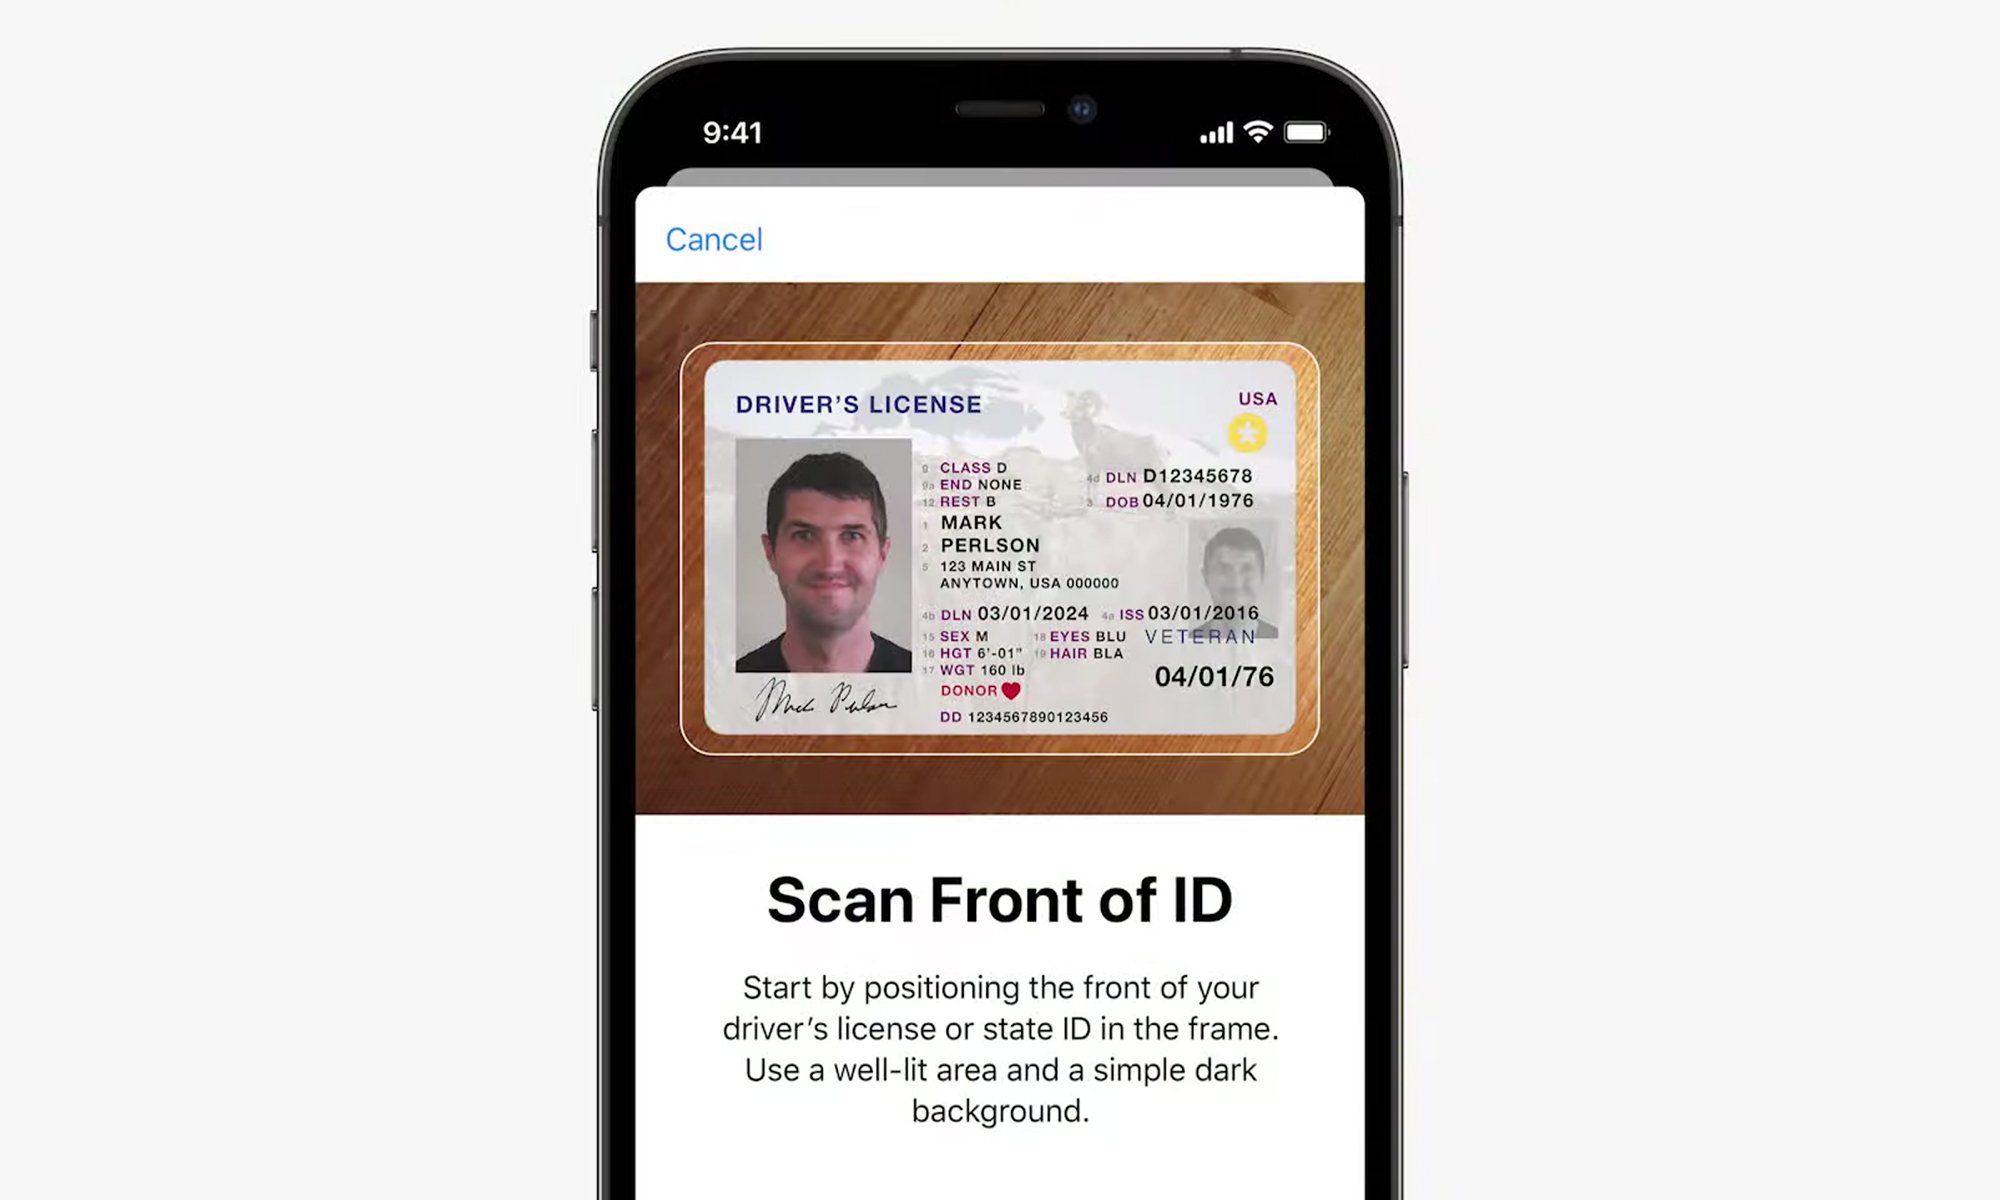 Apple Wallet can hold driver's licenses in iOS 15